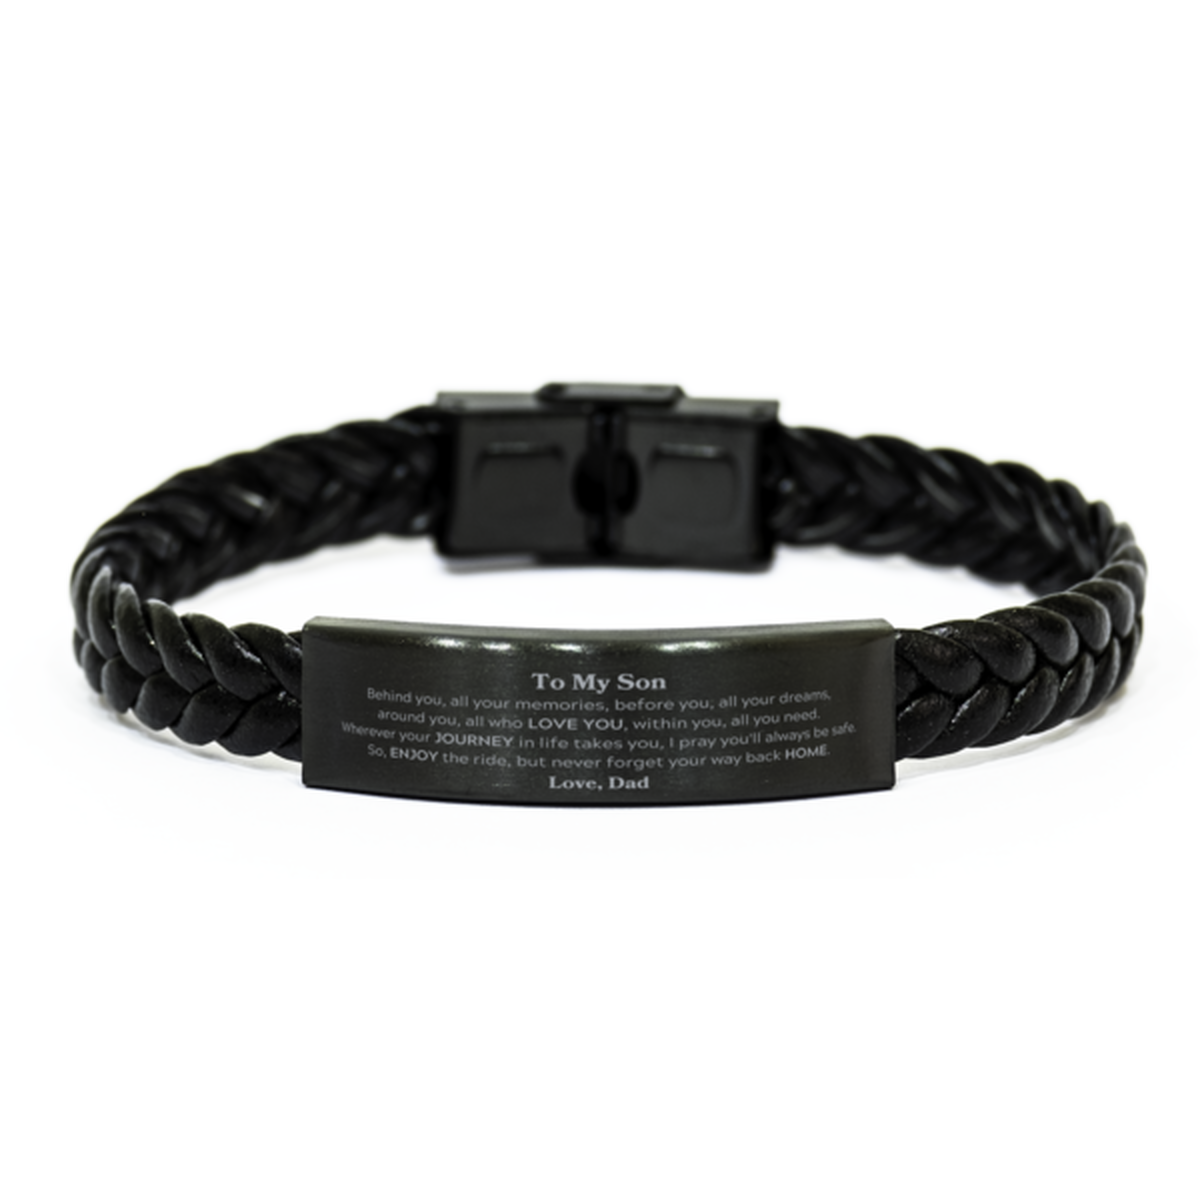 To My Son Graduation Gifts from Dad, Son Braided Leather Bracelet Christmas Birthday Gifts for Son Behind you, all your memories, before you, all your dreams. Love, Dad